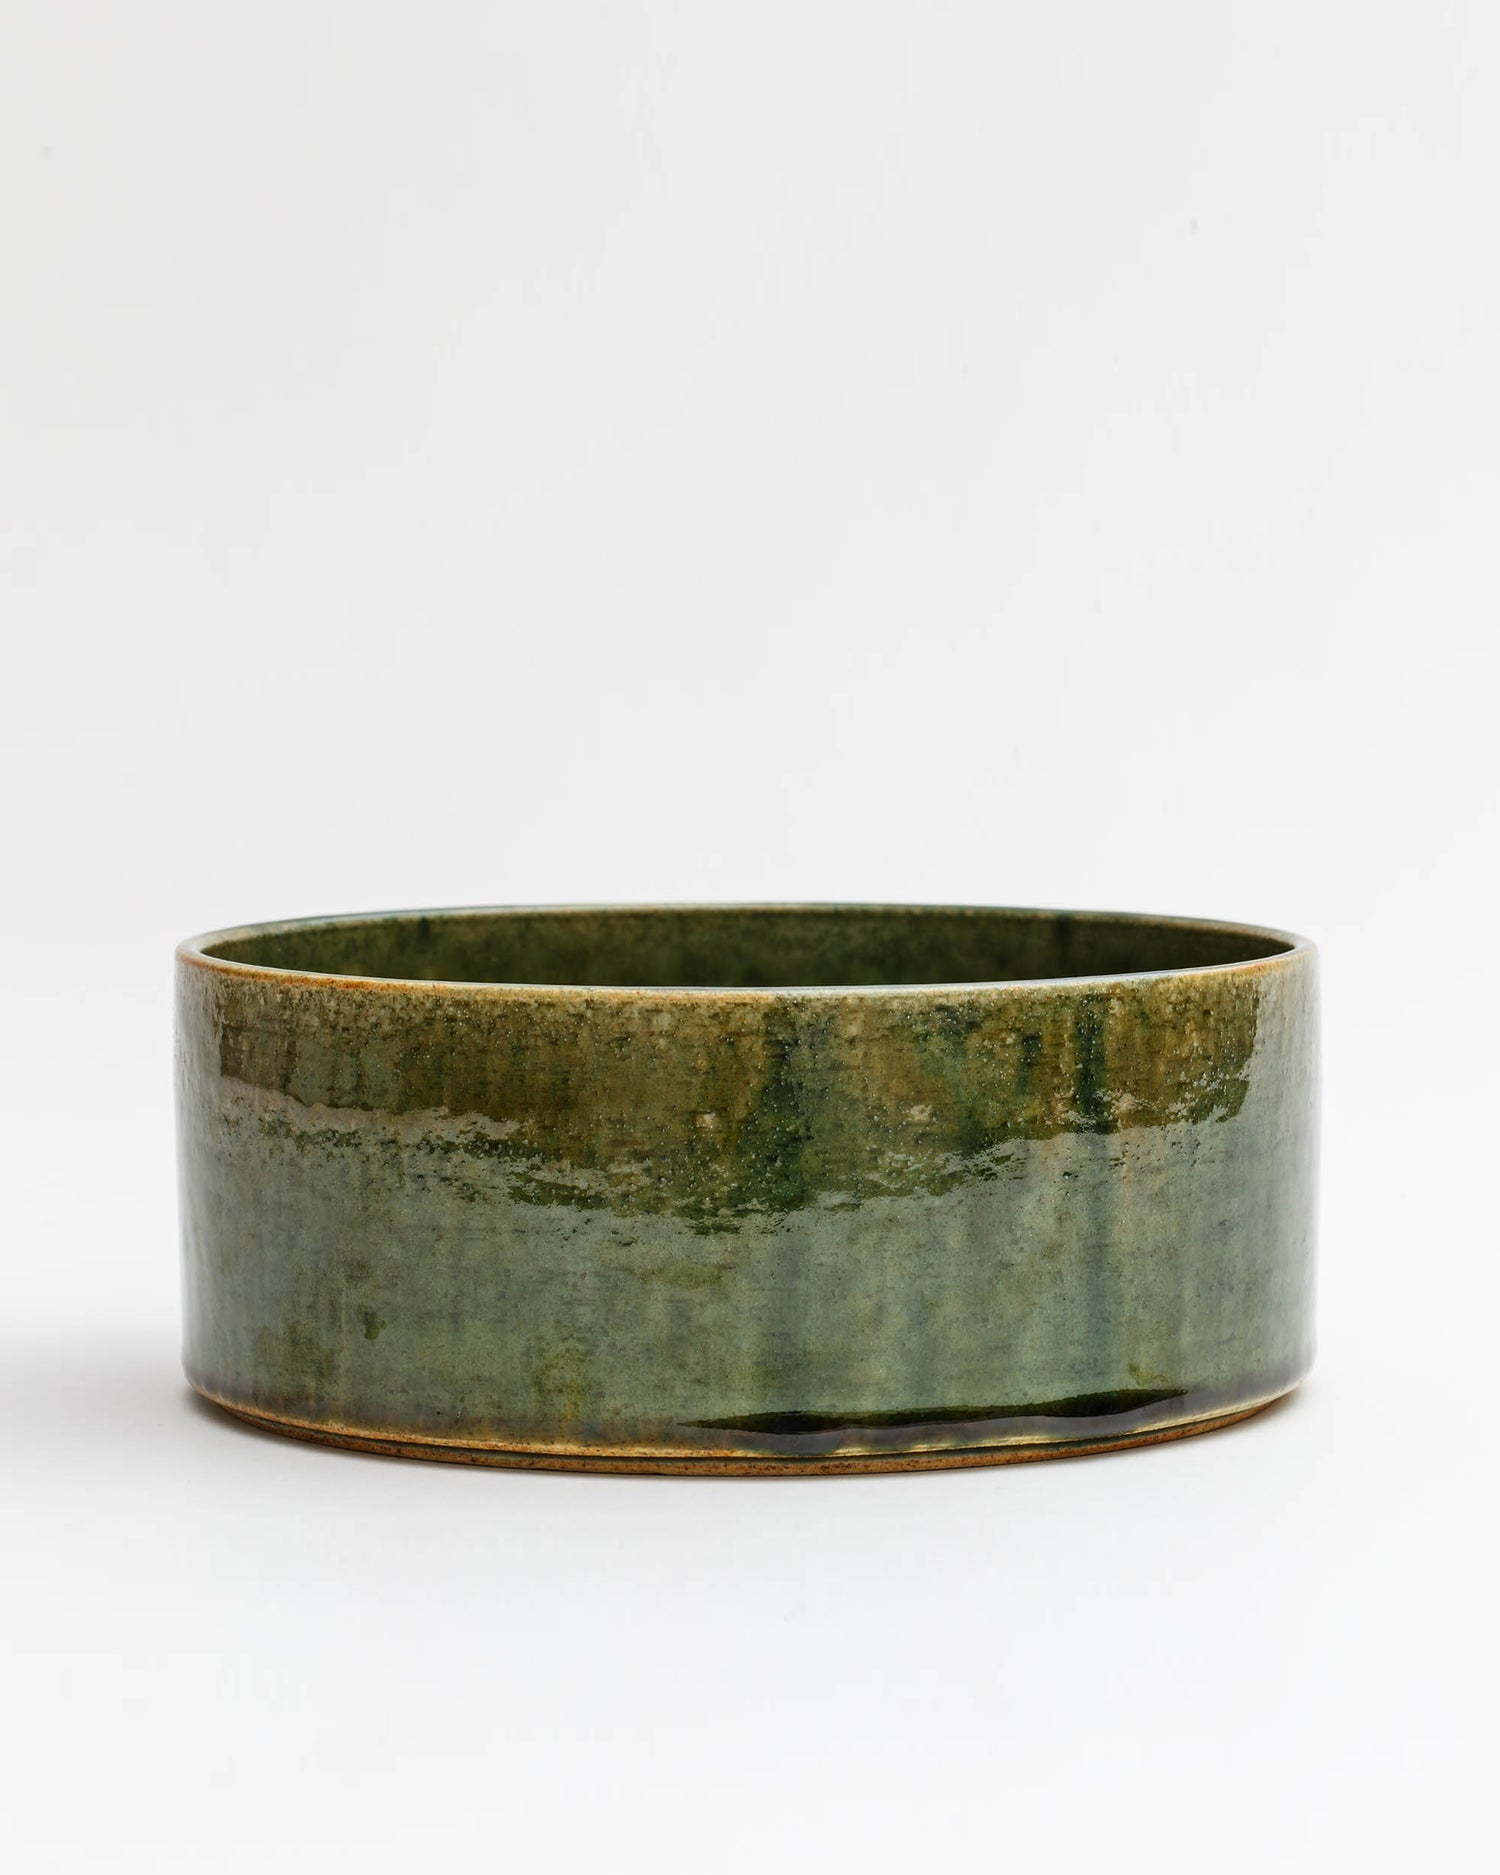 Silhouetted image of large ceramic oribe bowl with deep green glaze by Time and Style against white-gray background.